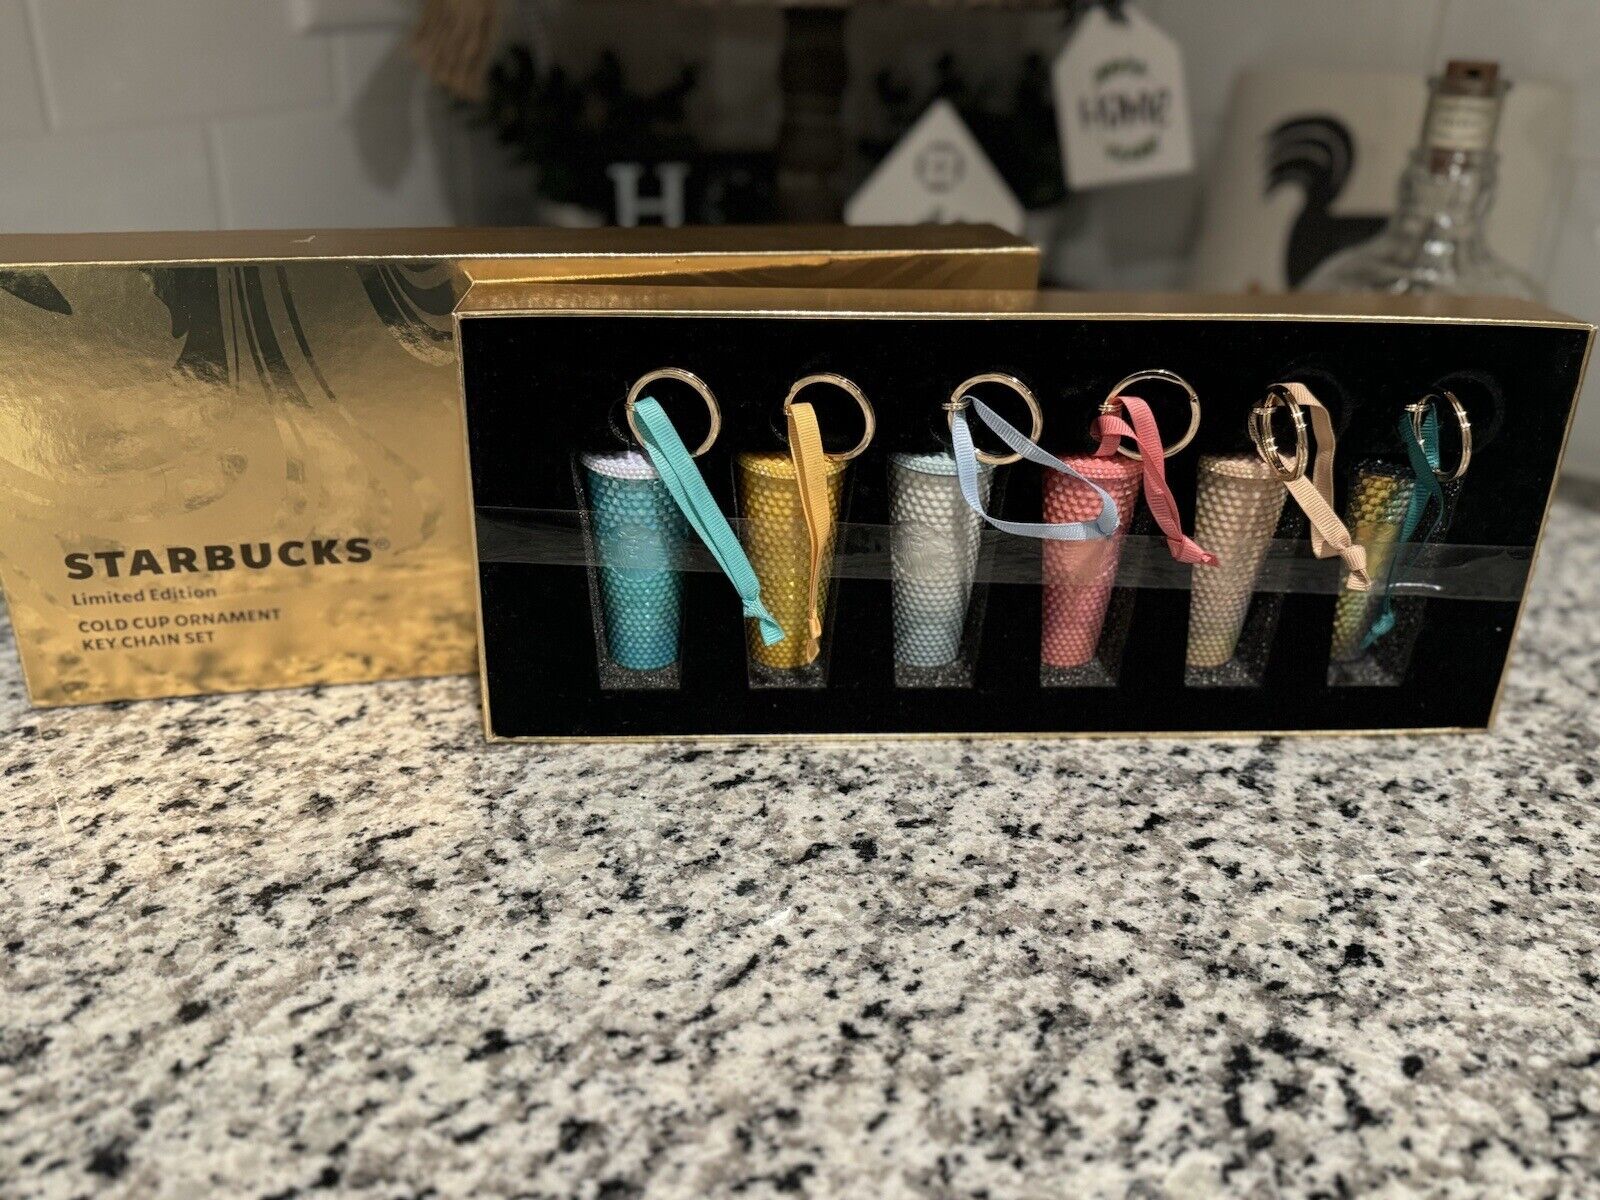 STARBUCKS LIMITED EDITION COLD CUP ORNAMENT KEY CHAIN BOX SET GOLD AND BLACK